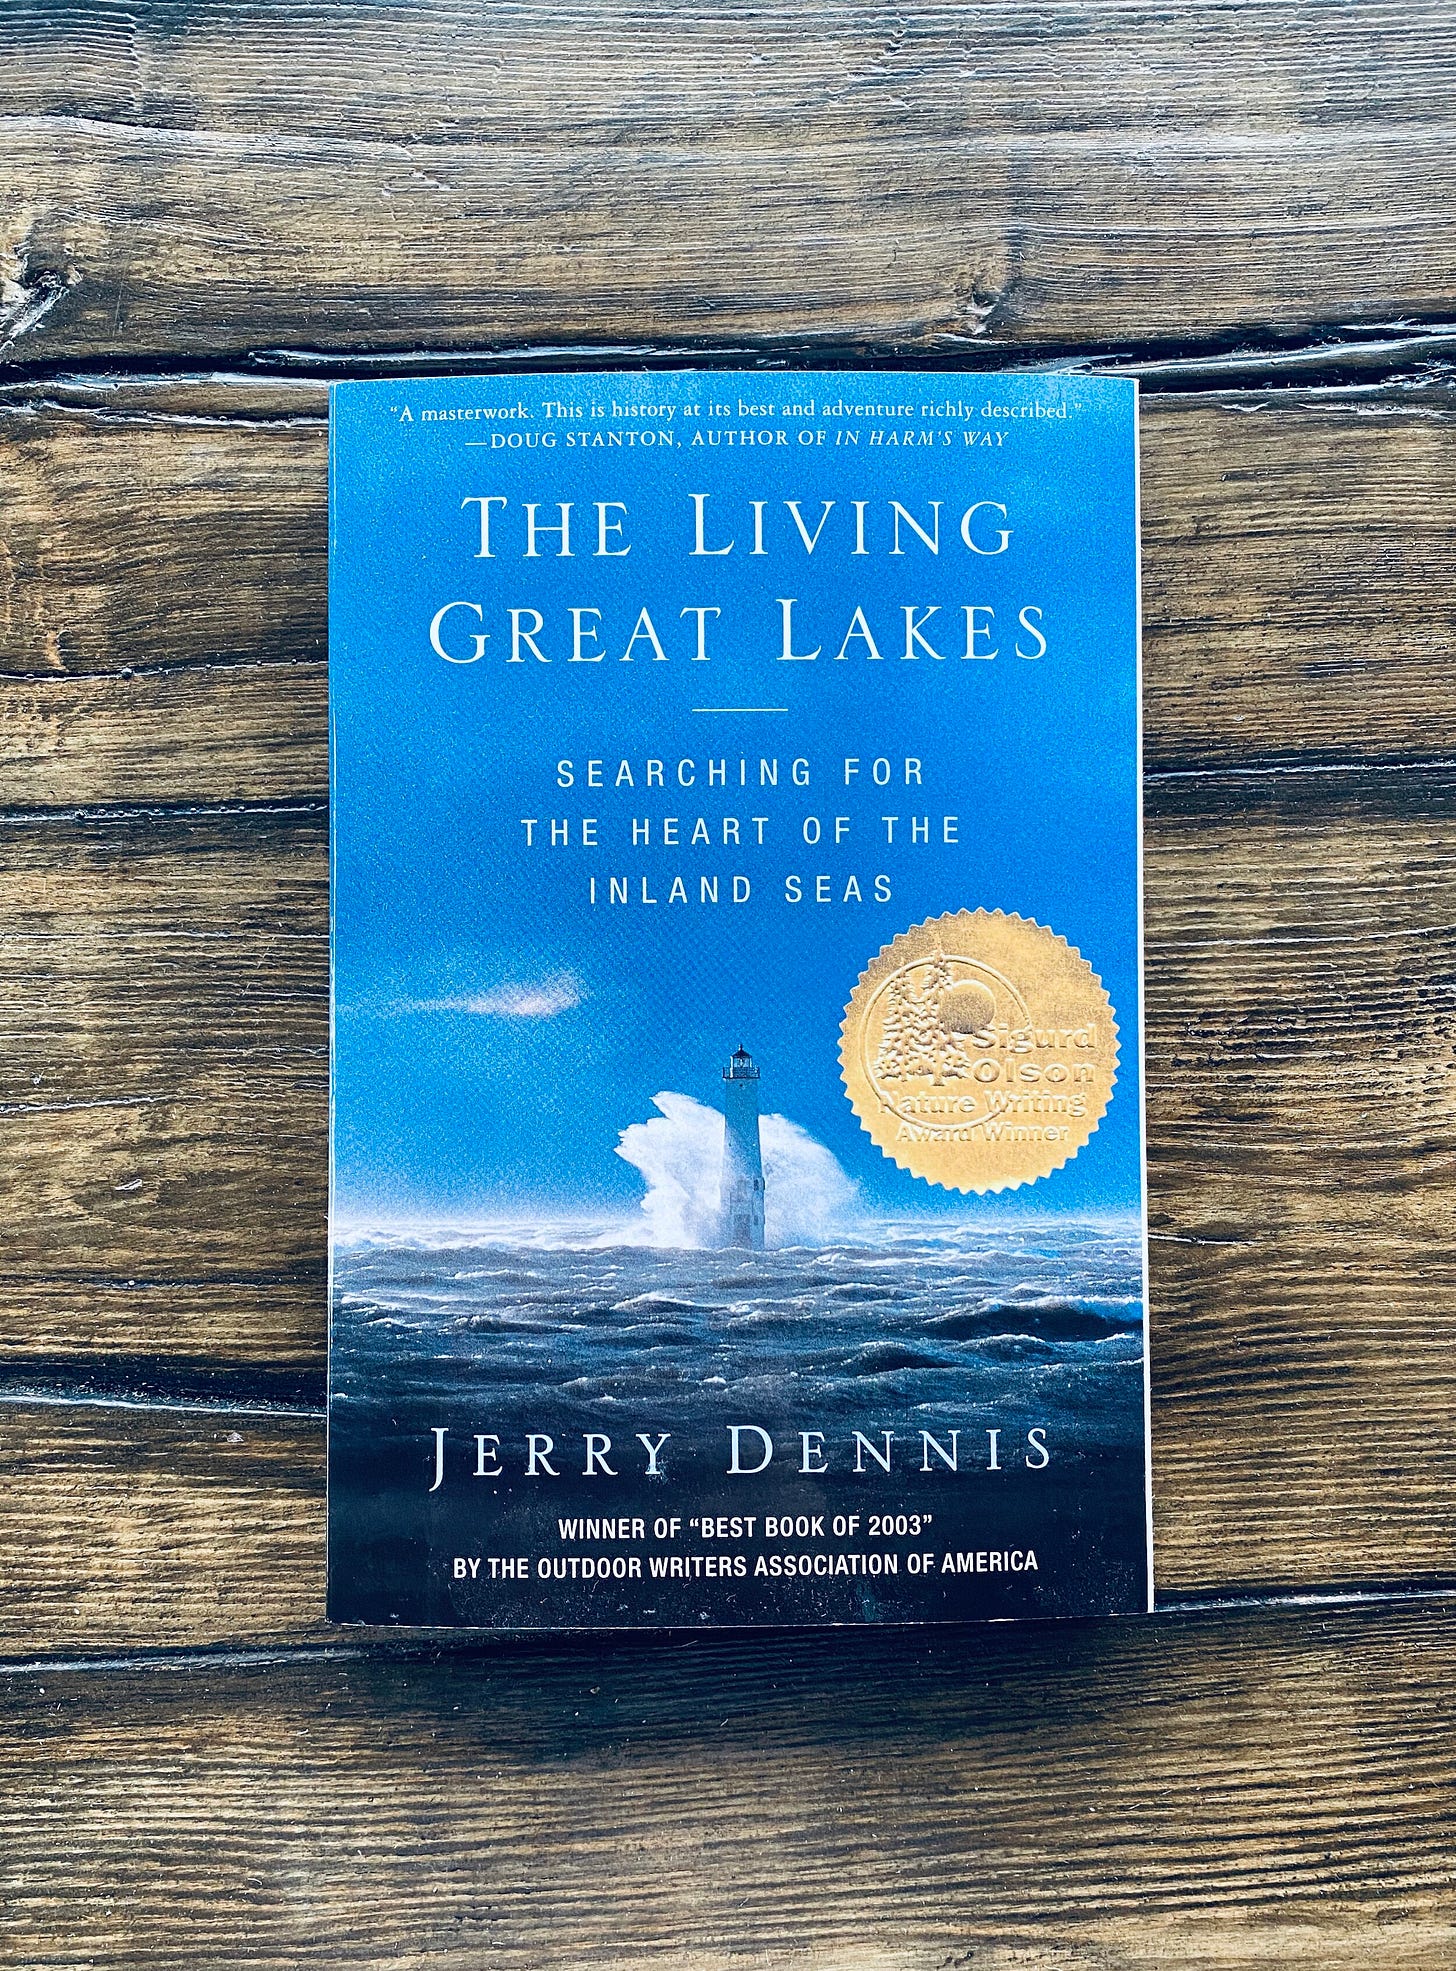 The Living Great Lakes, by Jerry Dennis